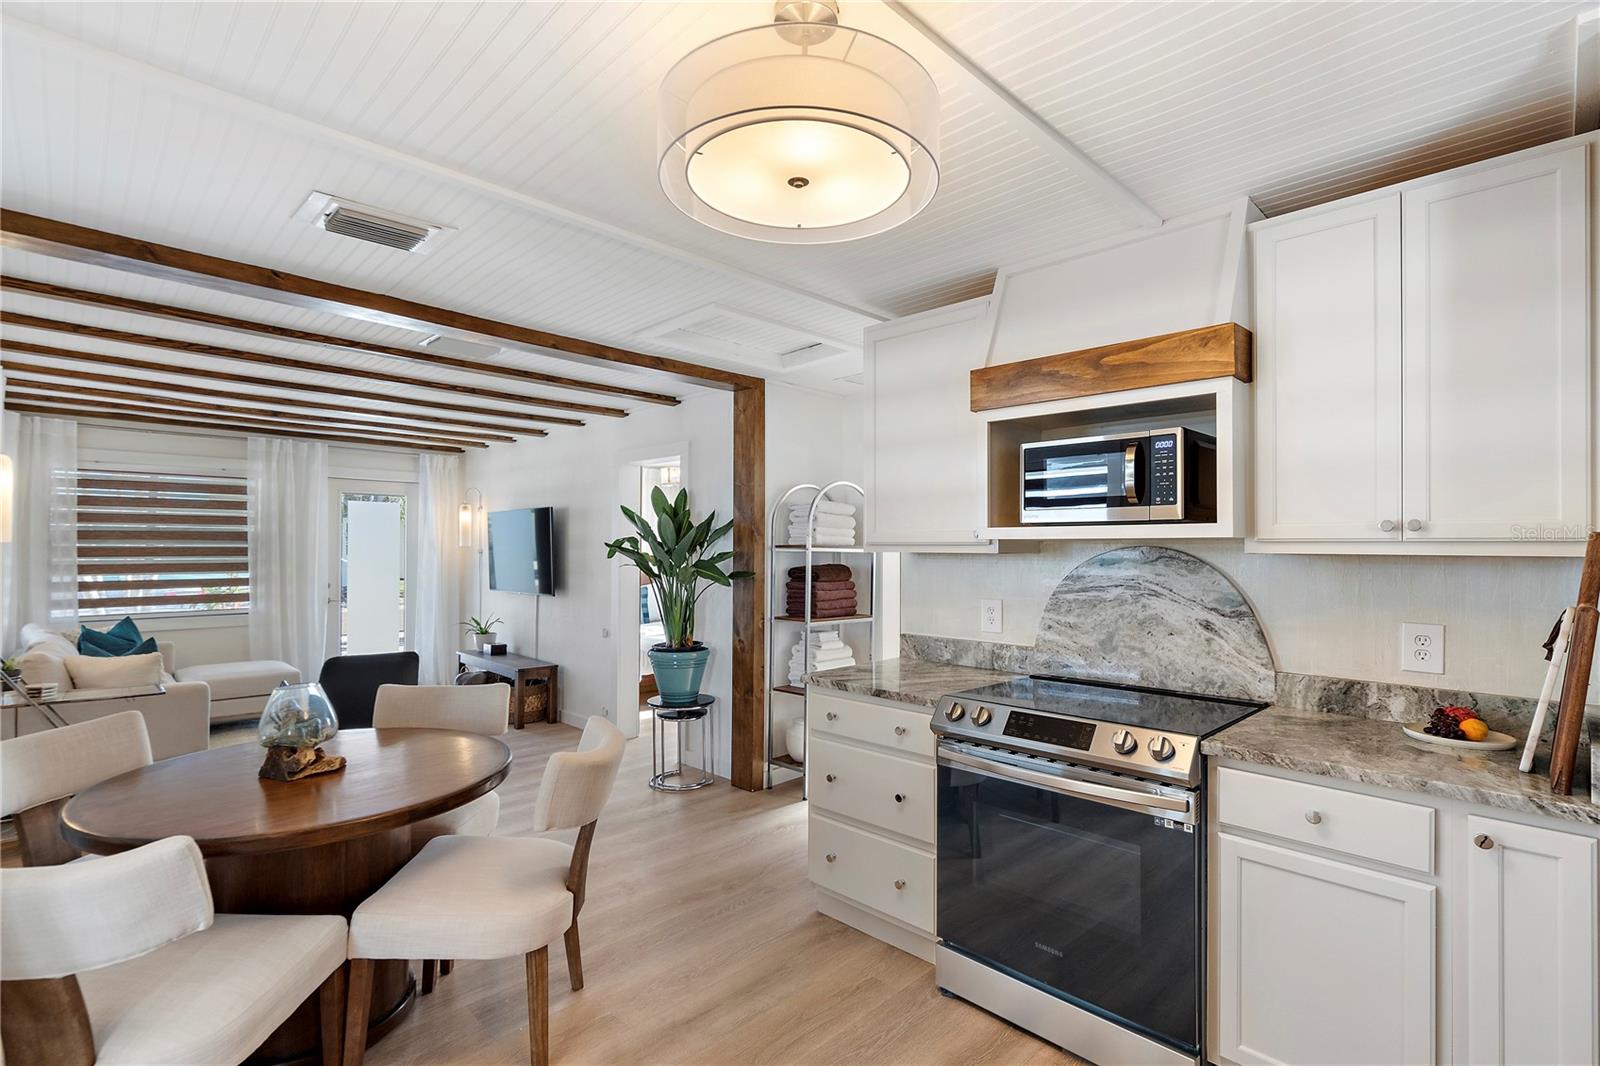 The kitchen features a full suite of appliances, a stunning light fixture and granite counters with a smooth, polished finish exuding a timeless elegance and sophistication.